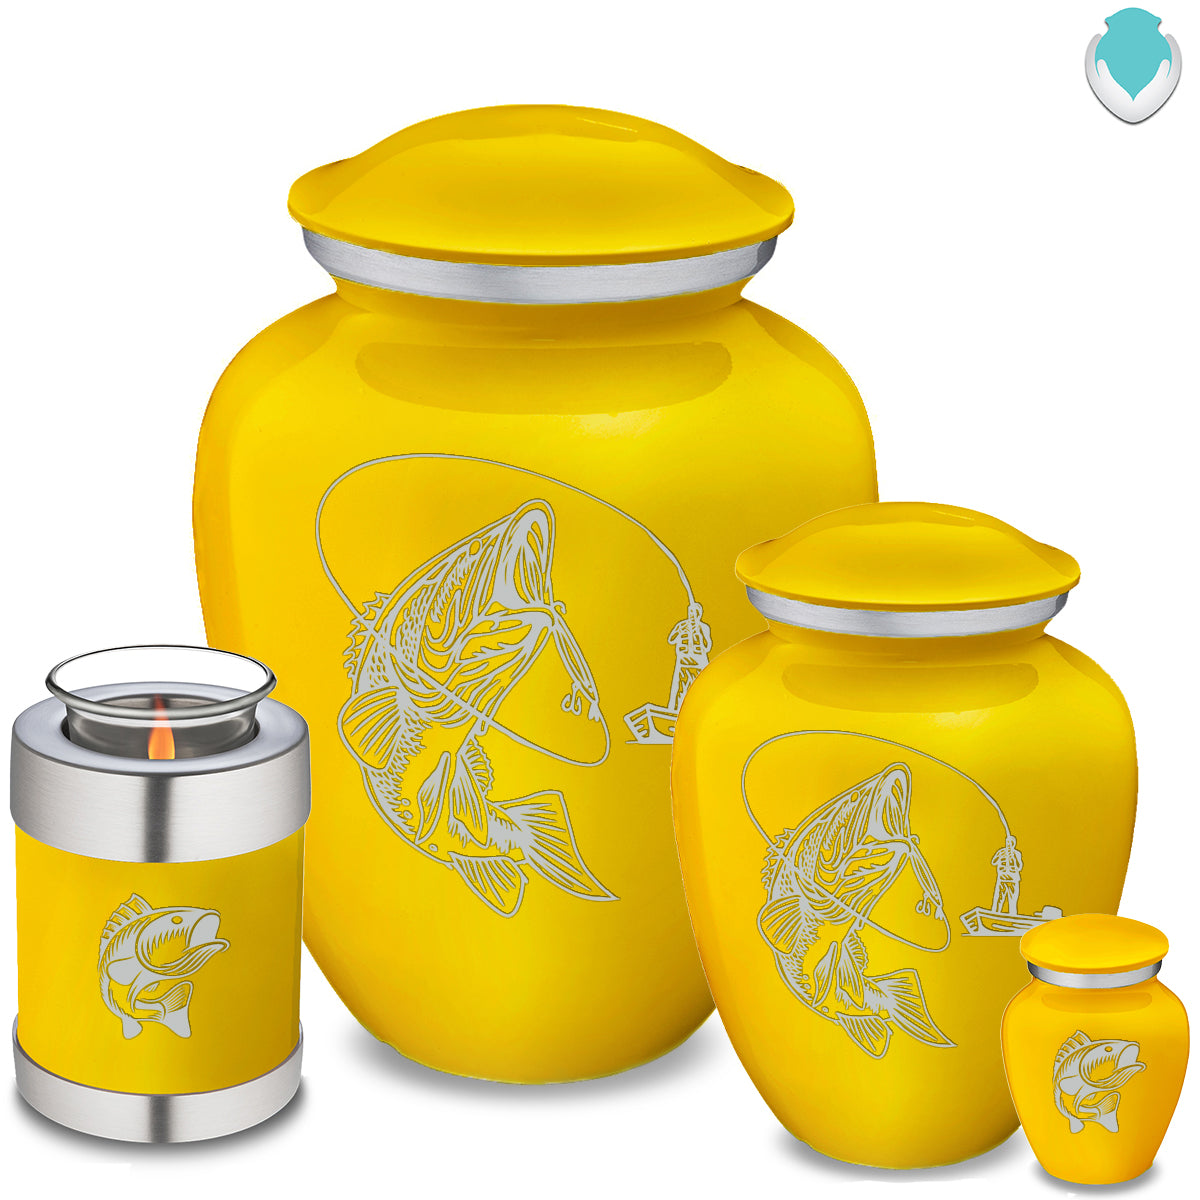 Adult Embrace Yellow Fishing Cremation Urn